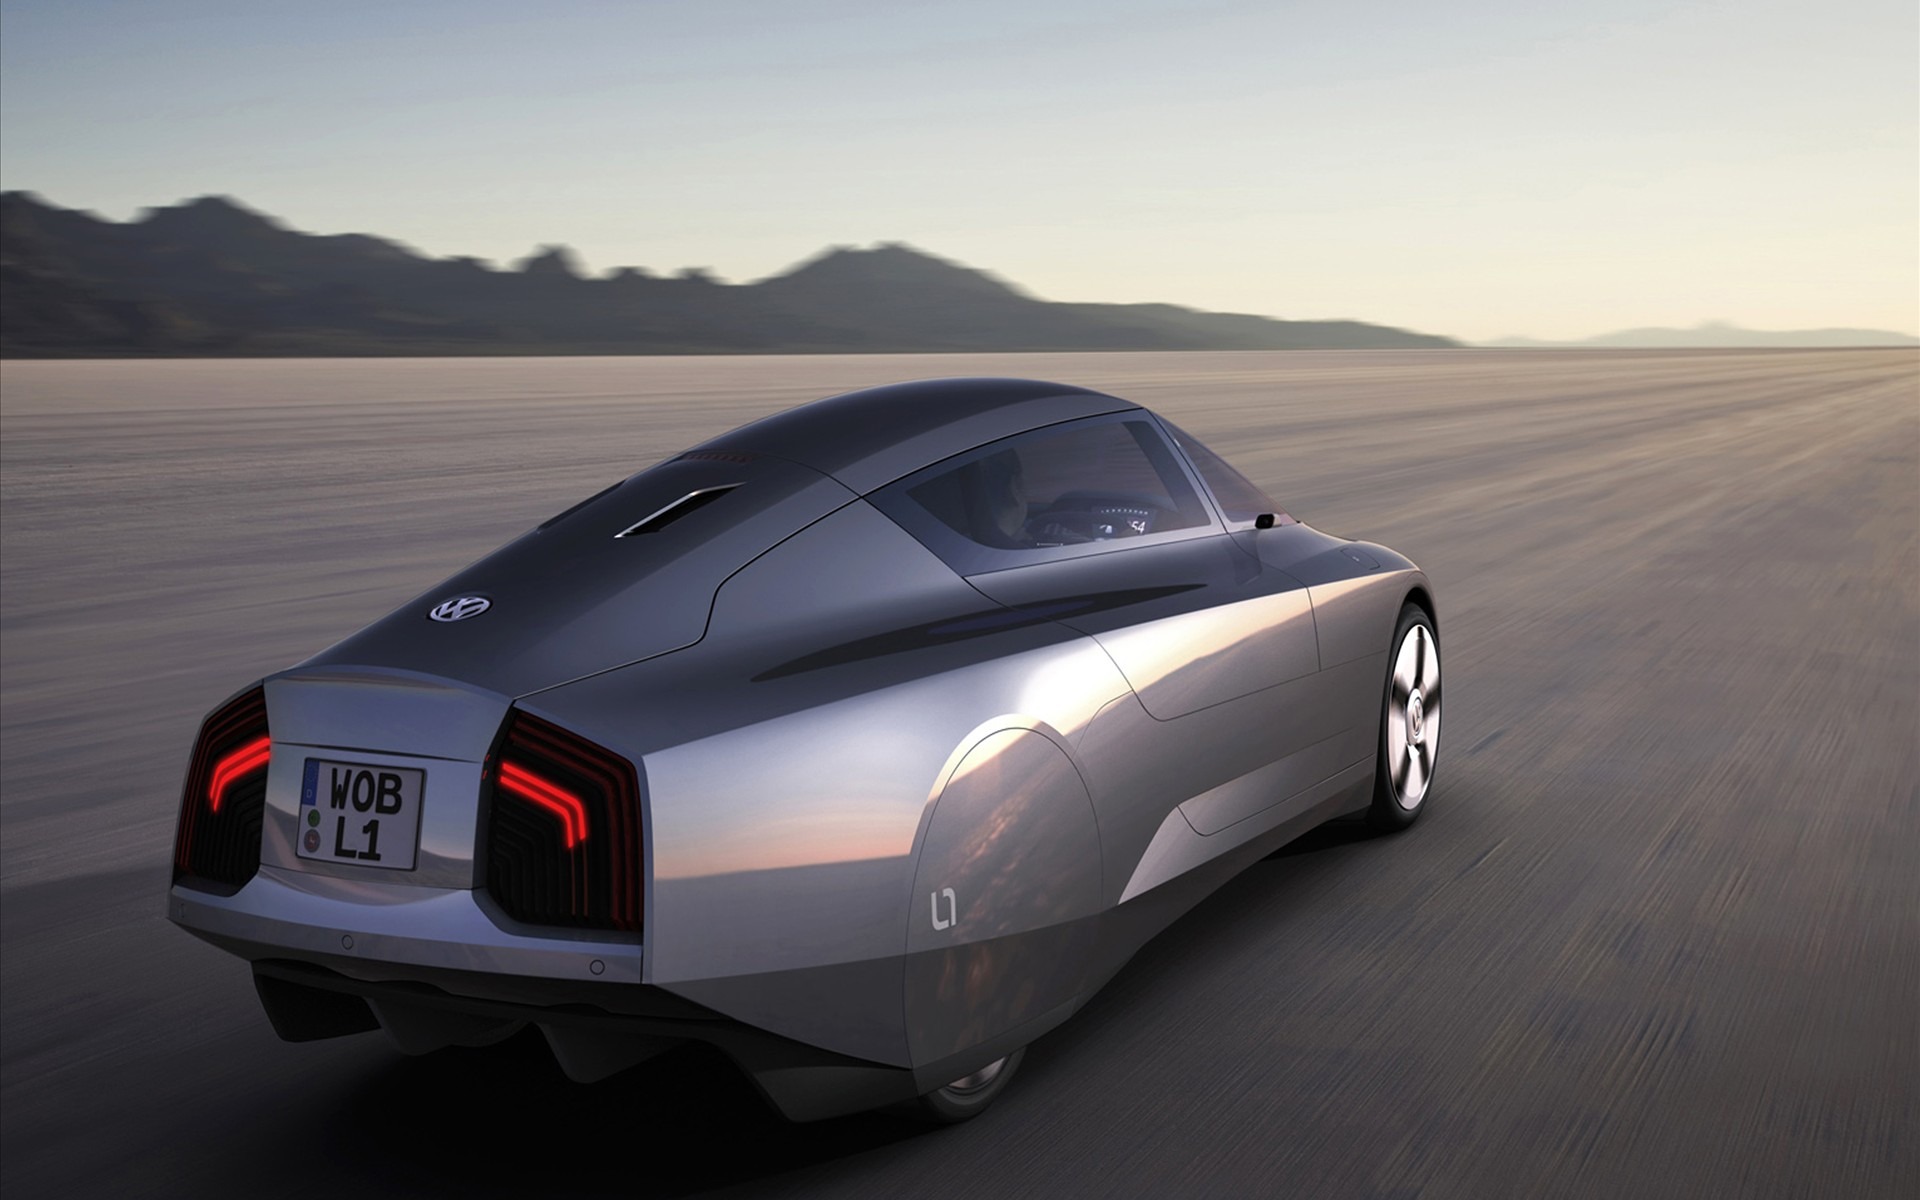 Volkswagen Concept Car tapety (1) #16 - 1920x1200